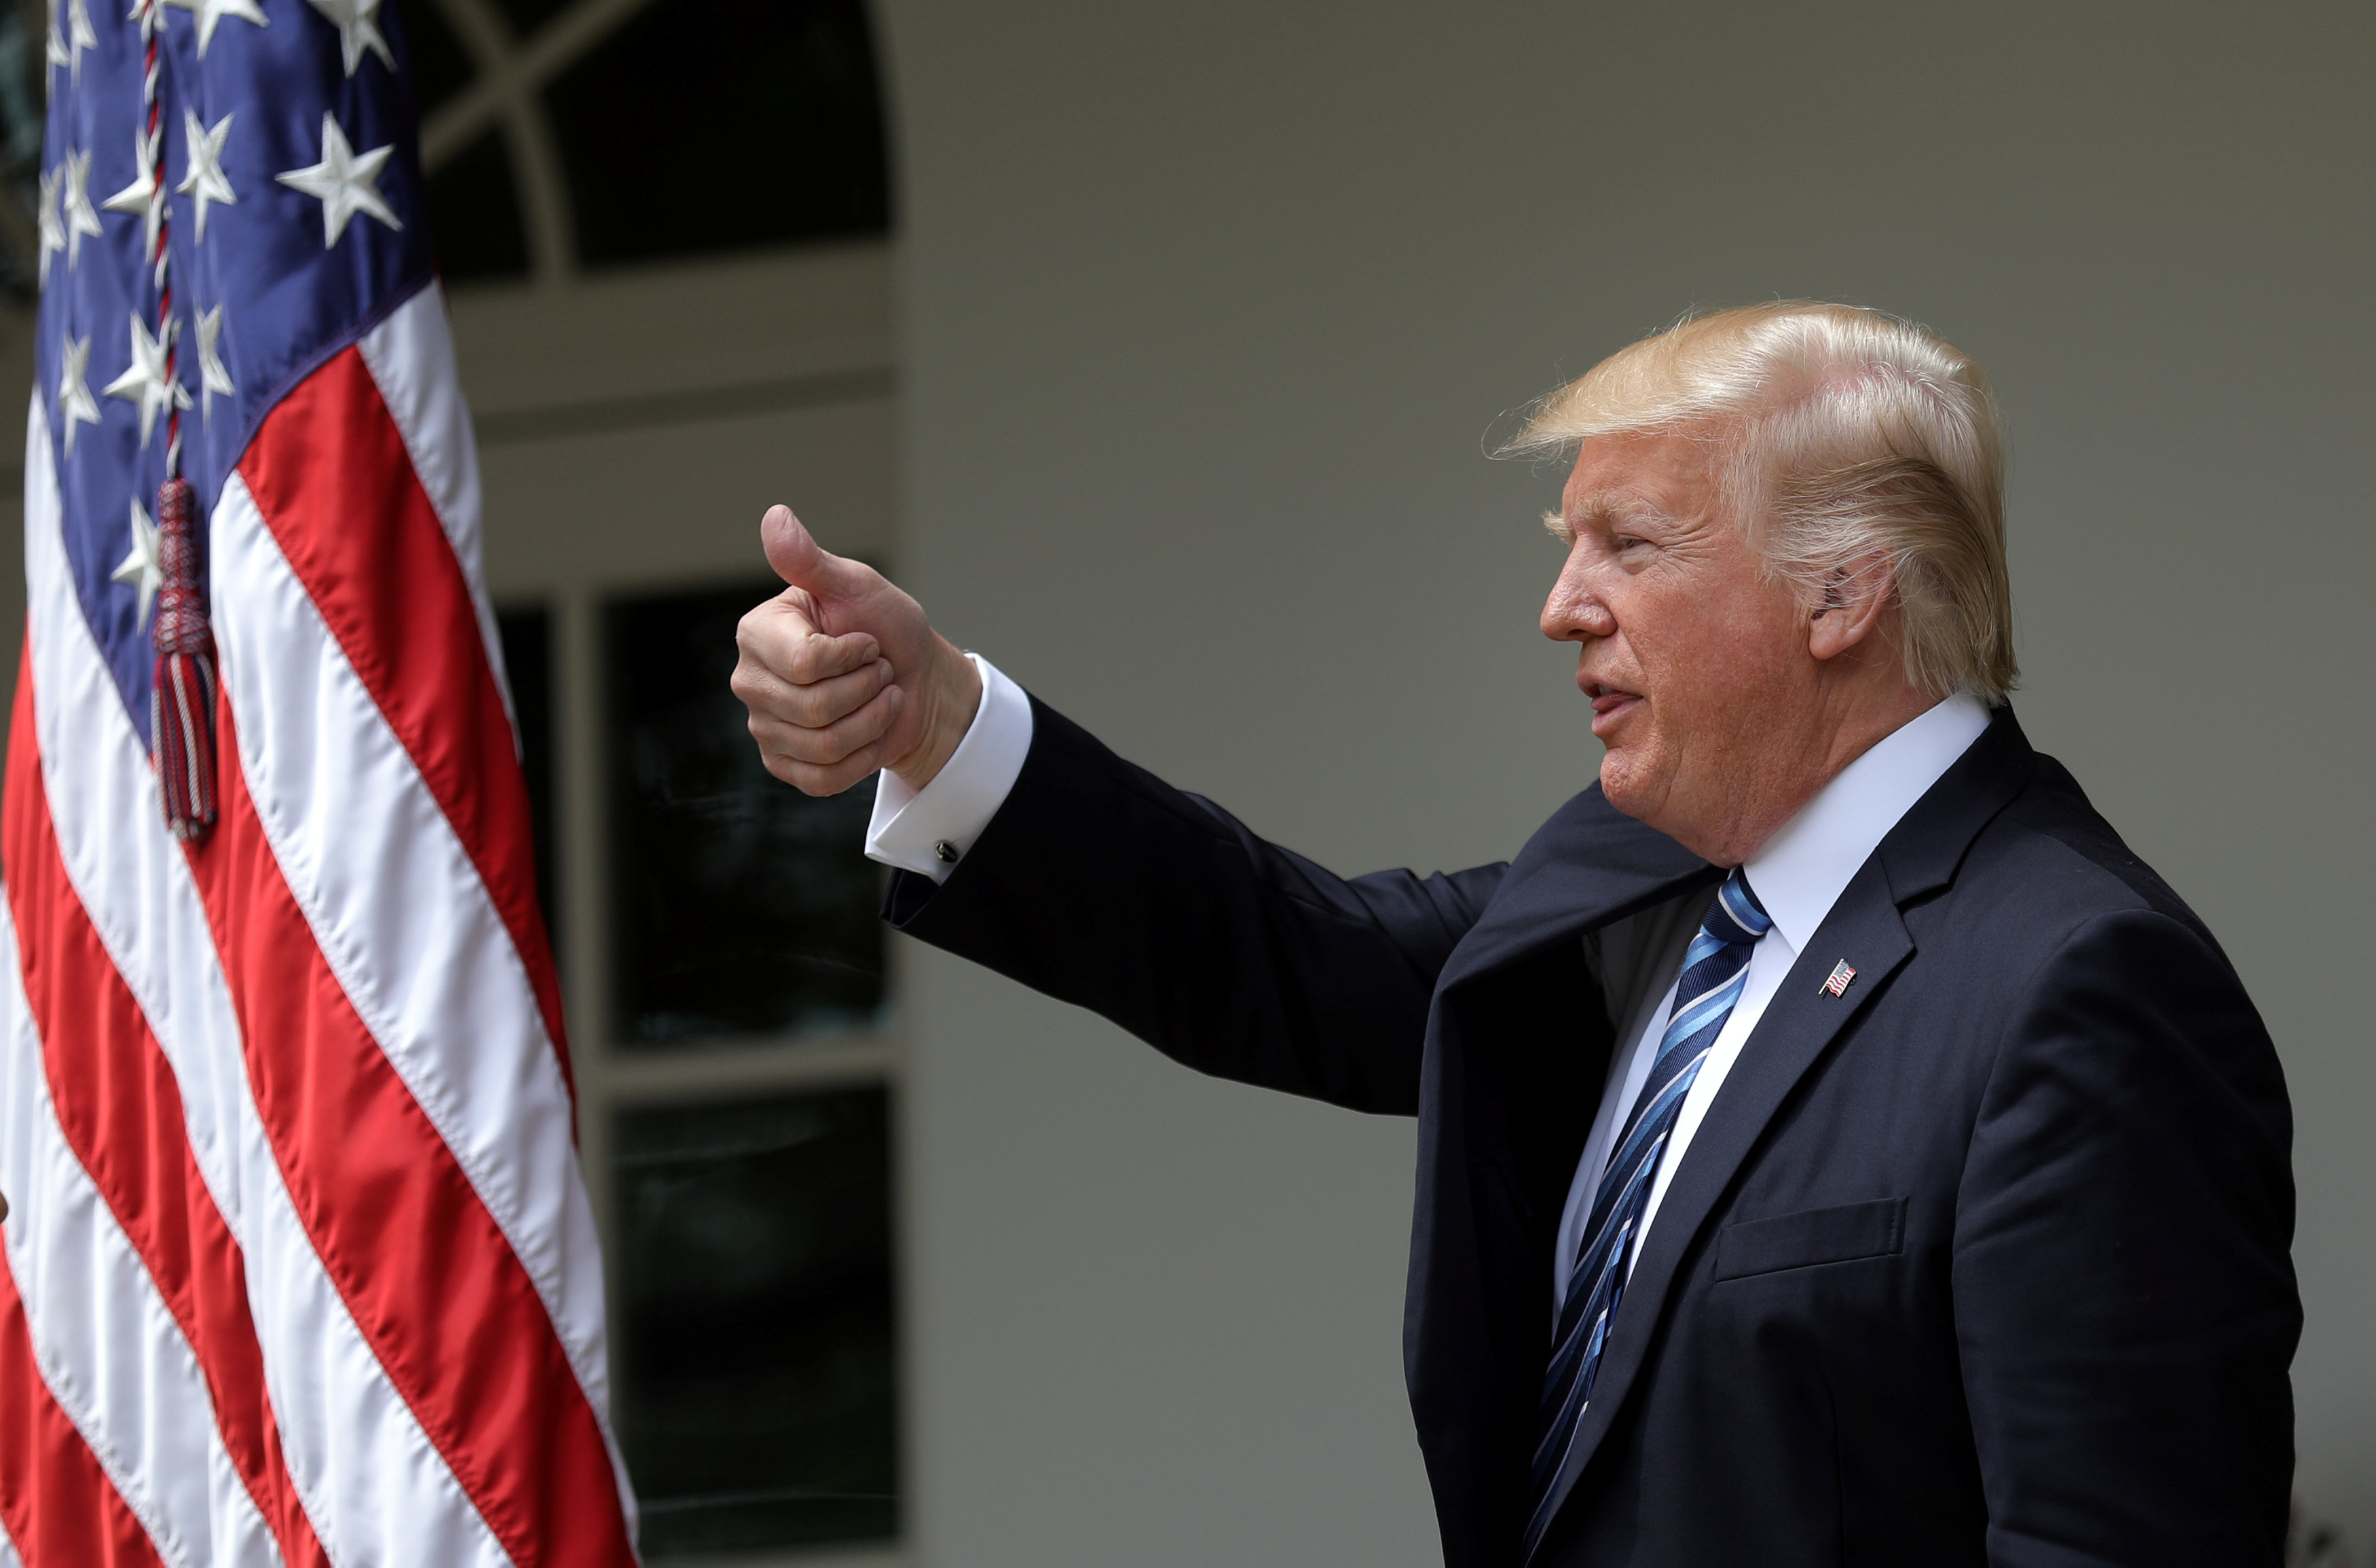 U.S. President Donald Trump gives a thumbs up during a National Day of Prayer event at the Rose Garden of the White House in Washington D.C., U.S., May 4, 2017. (REUTERS/Carlos Barria)